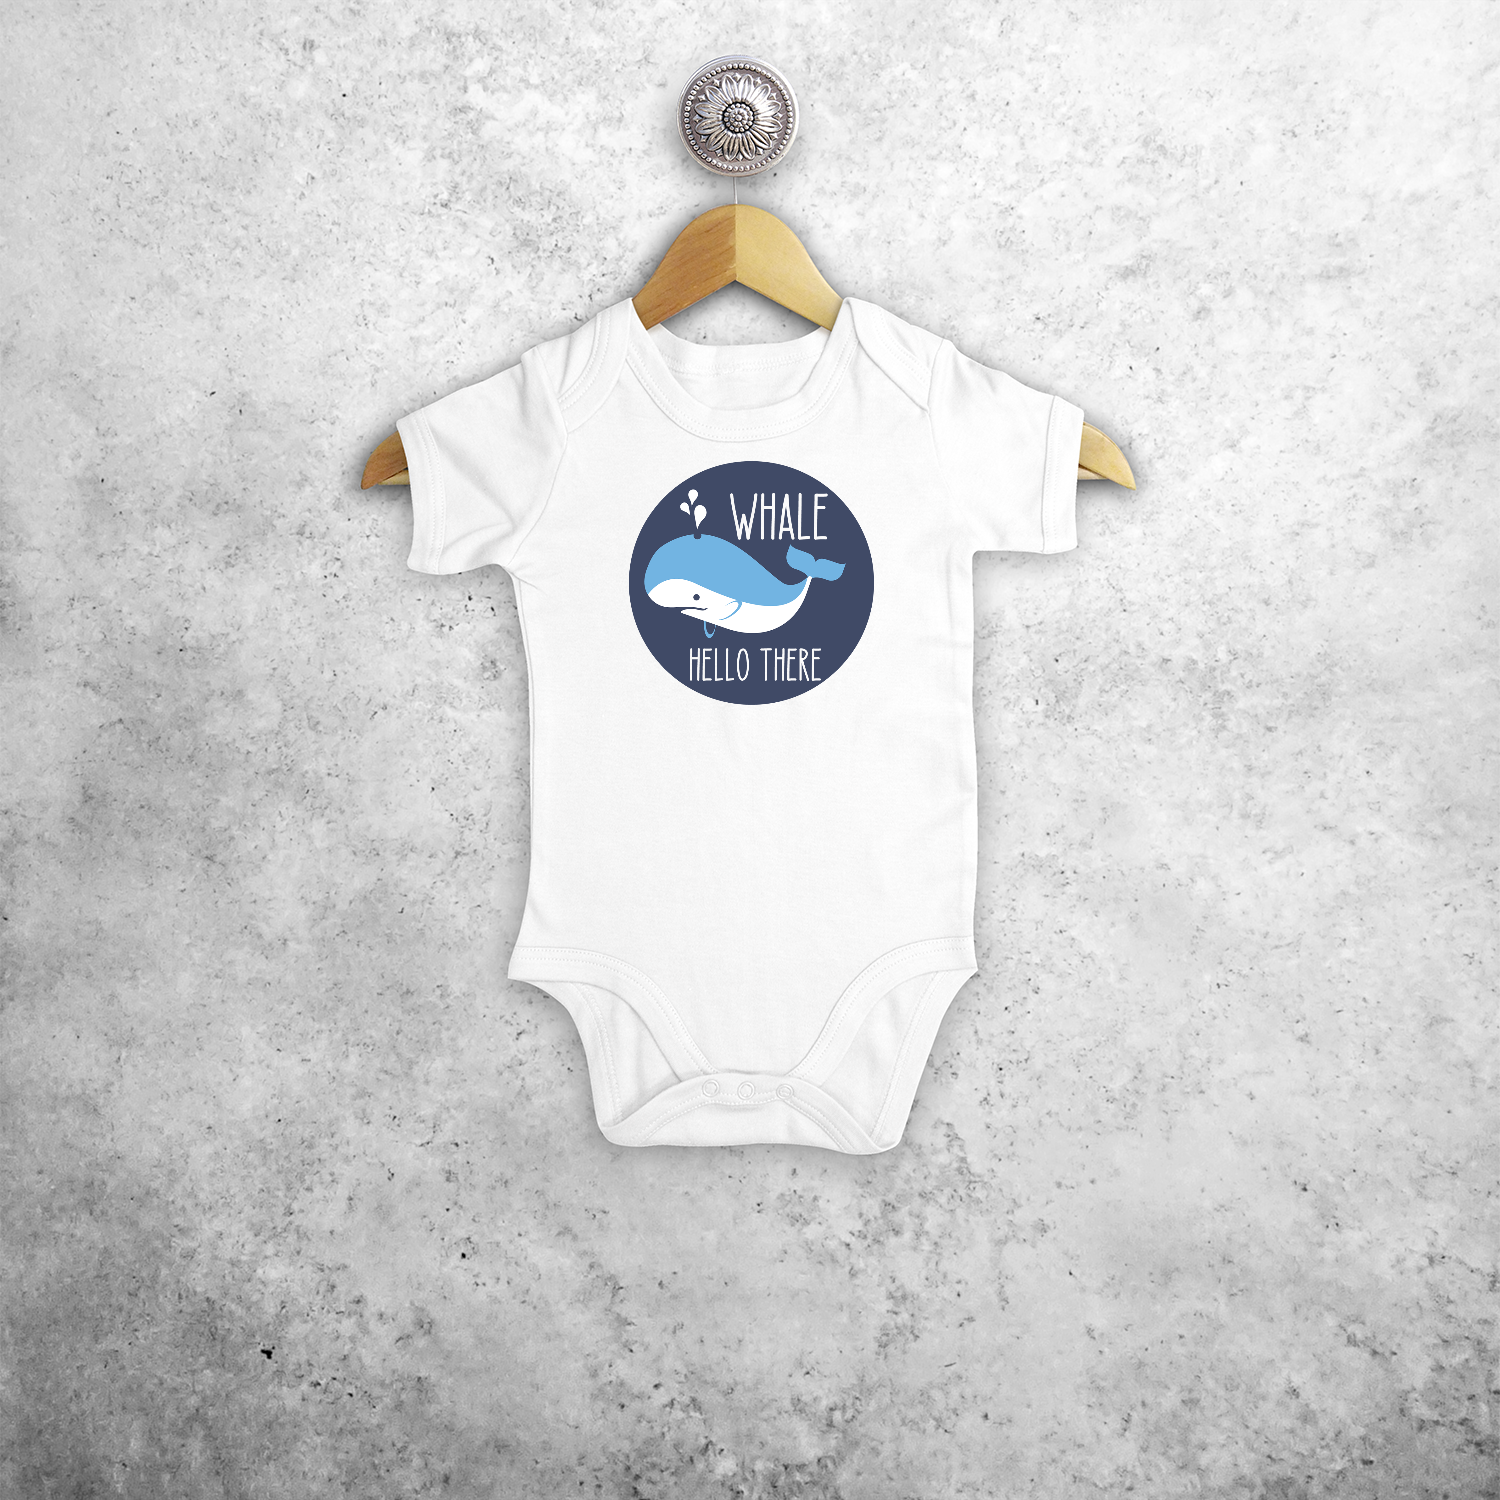 'Whale hello there' baby shortsleeve bodysuit